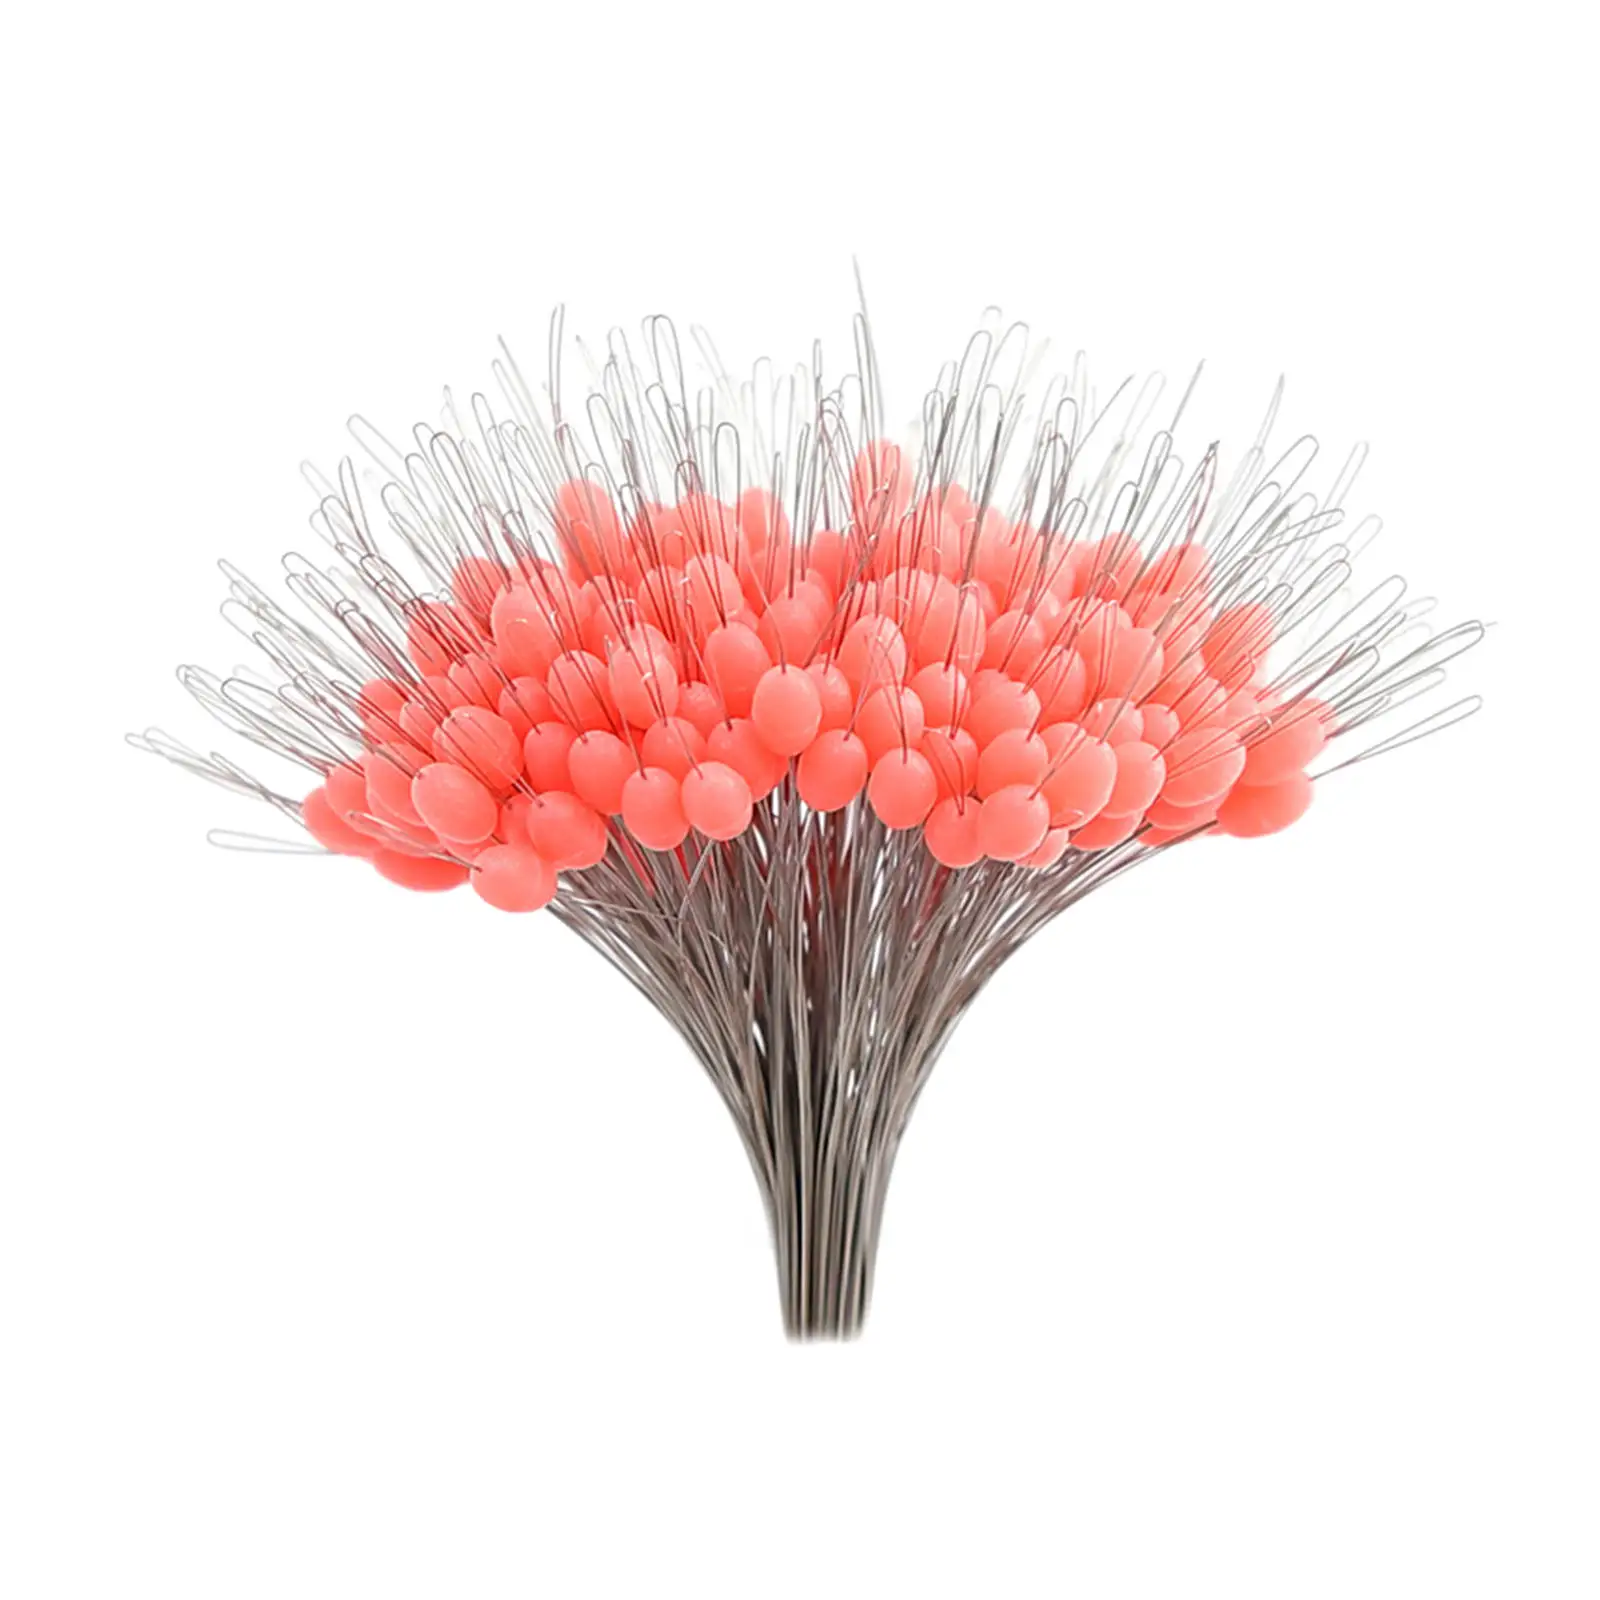 300Pcs Bait Fishing Bobber Beads Stoppers Silicone Sinker Line Stops Fishing Gear Carp Floater for Rigging Float Positioning